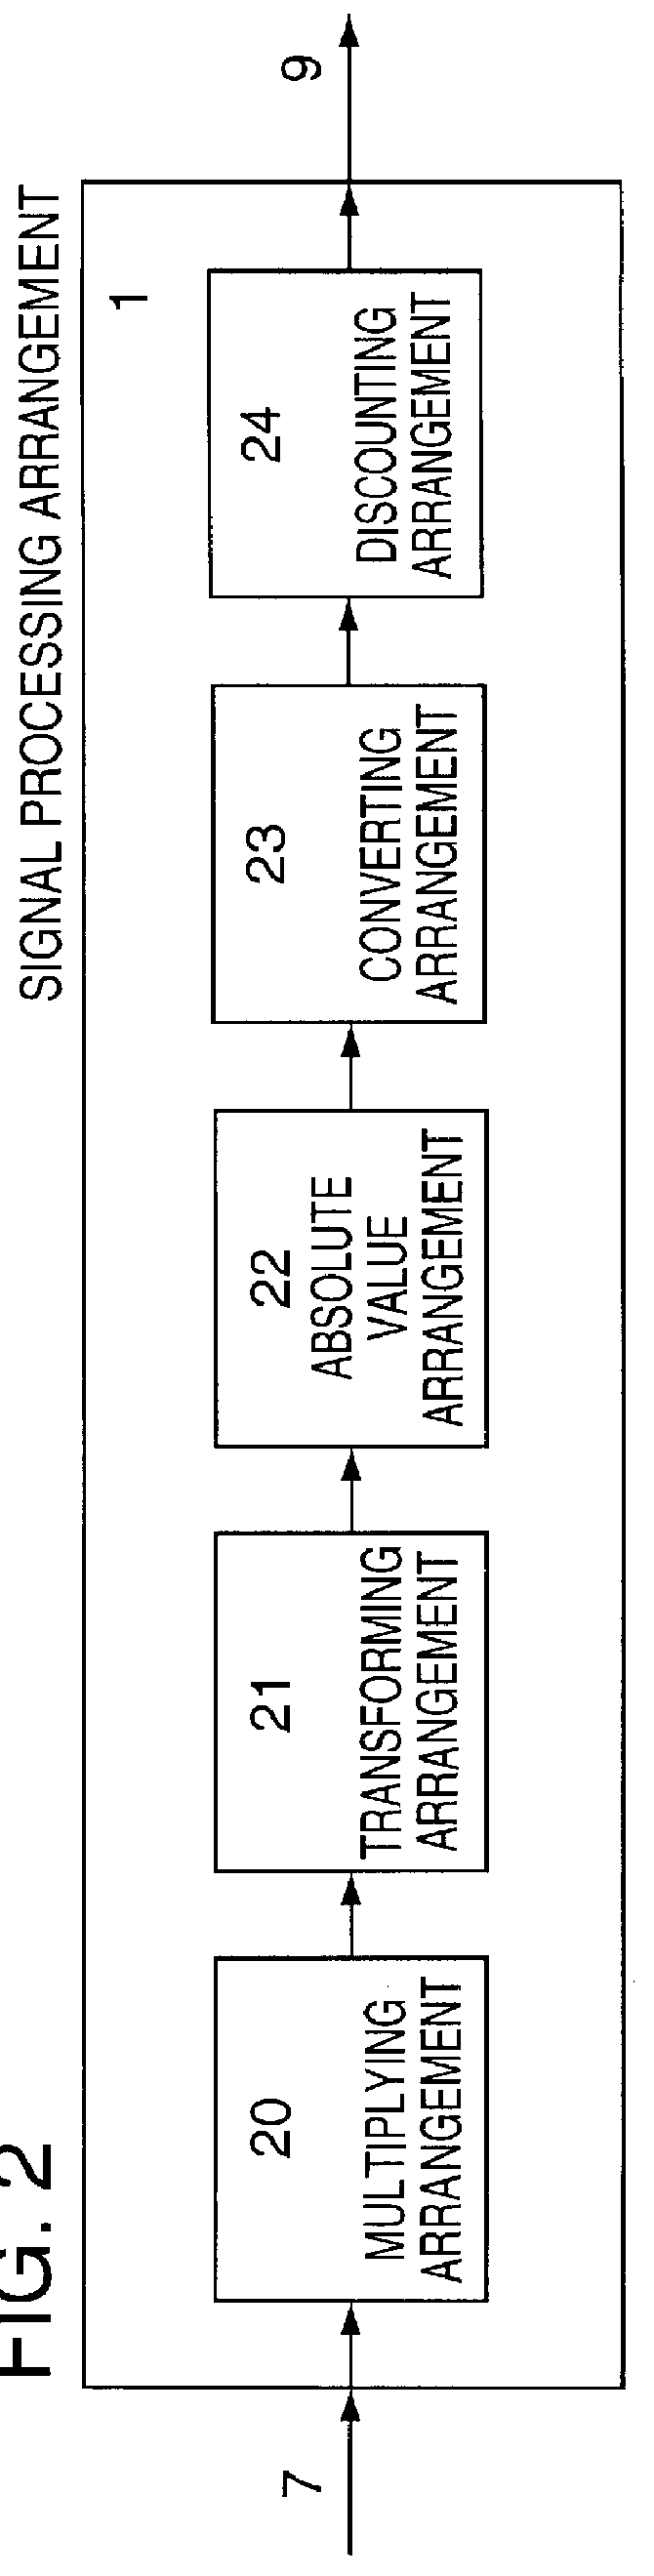 Signal quality determining device and method